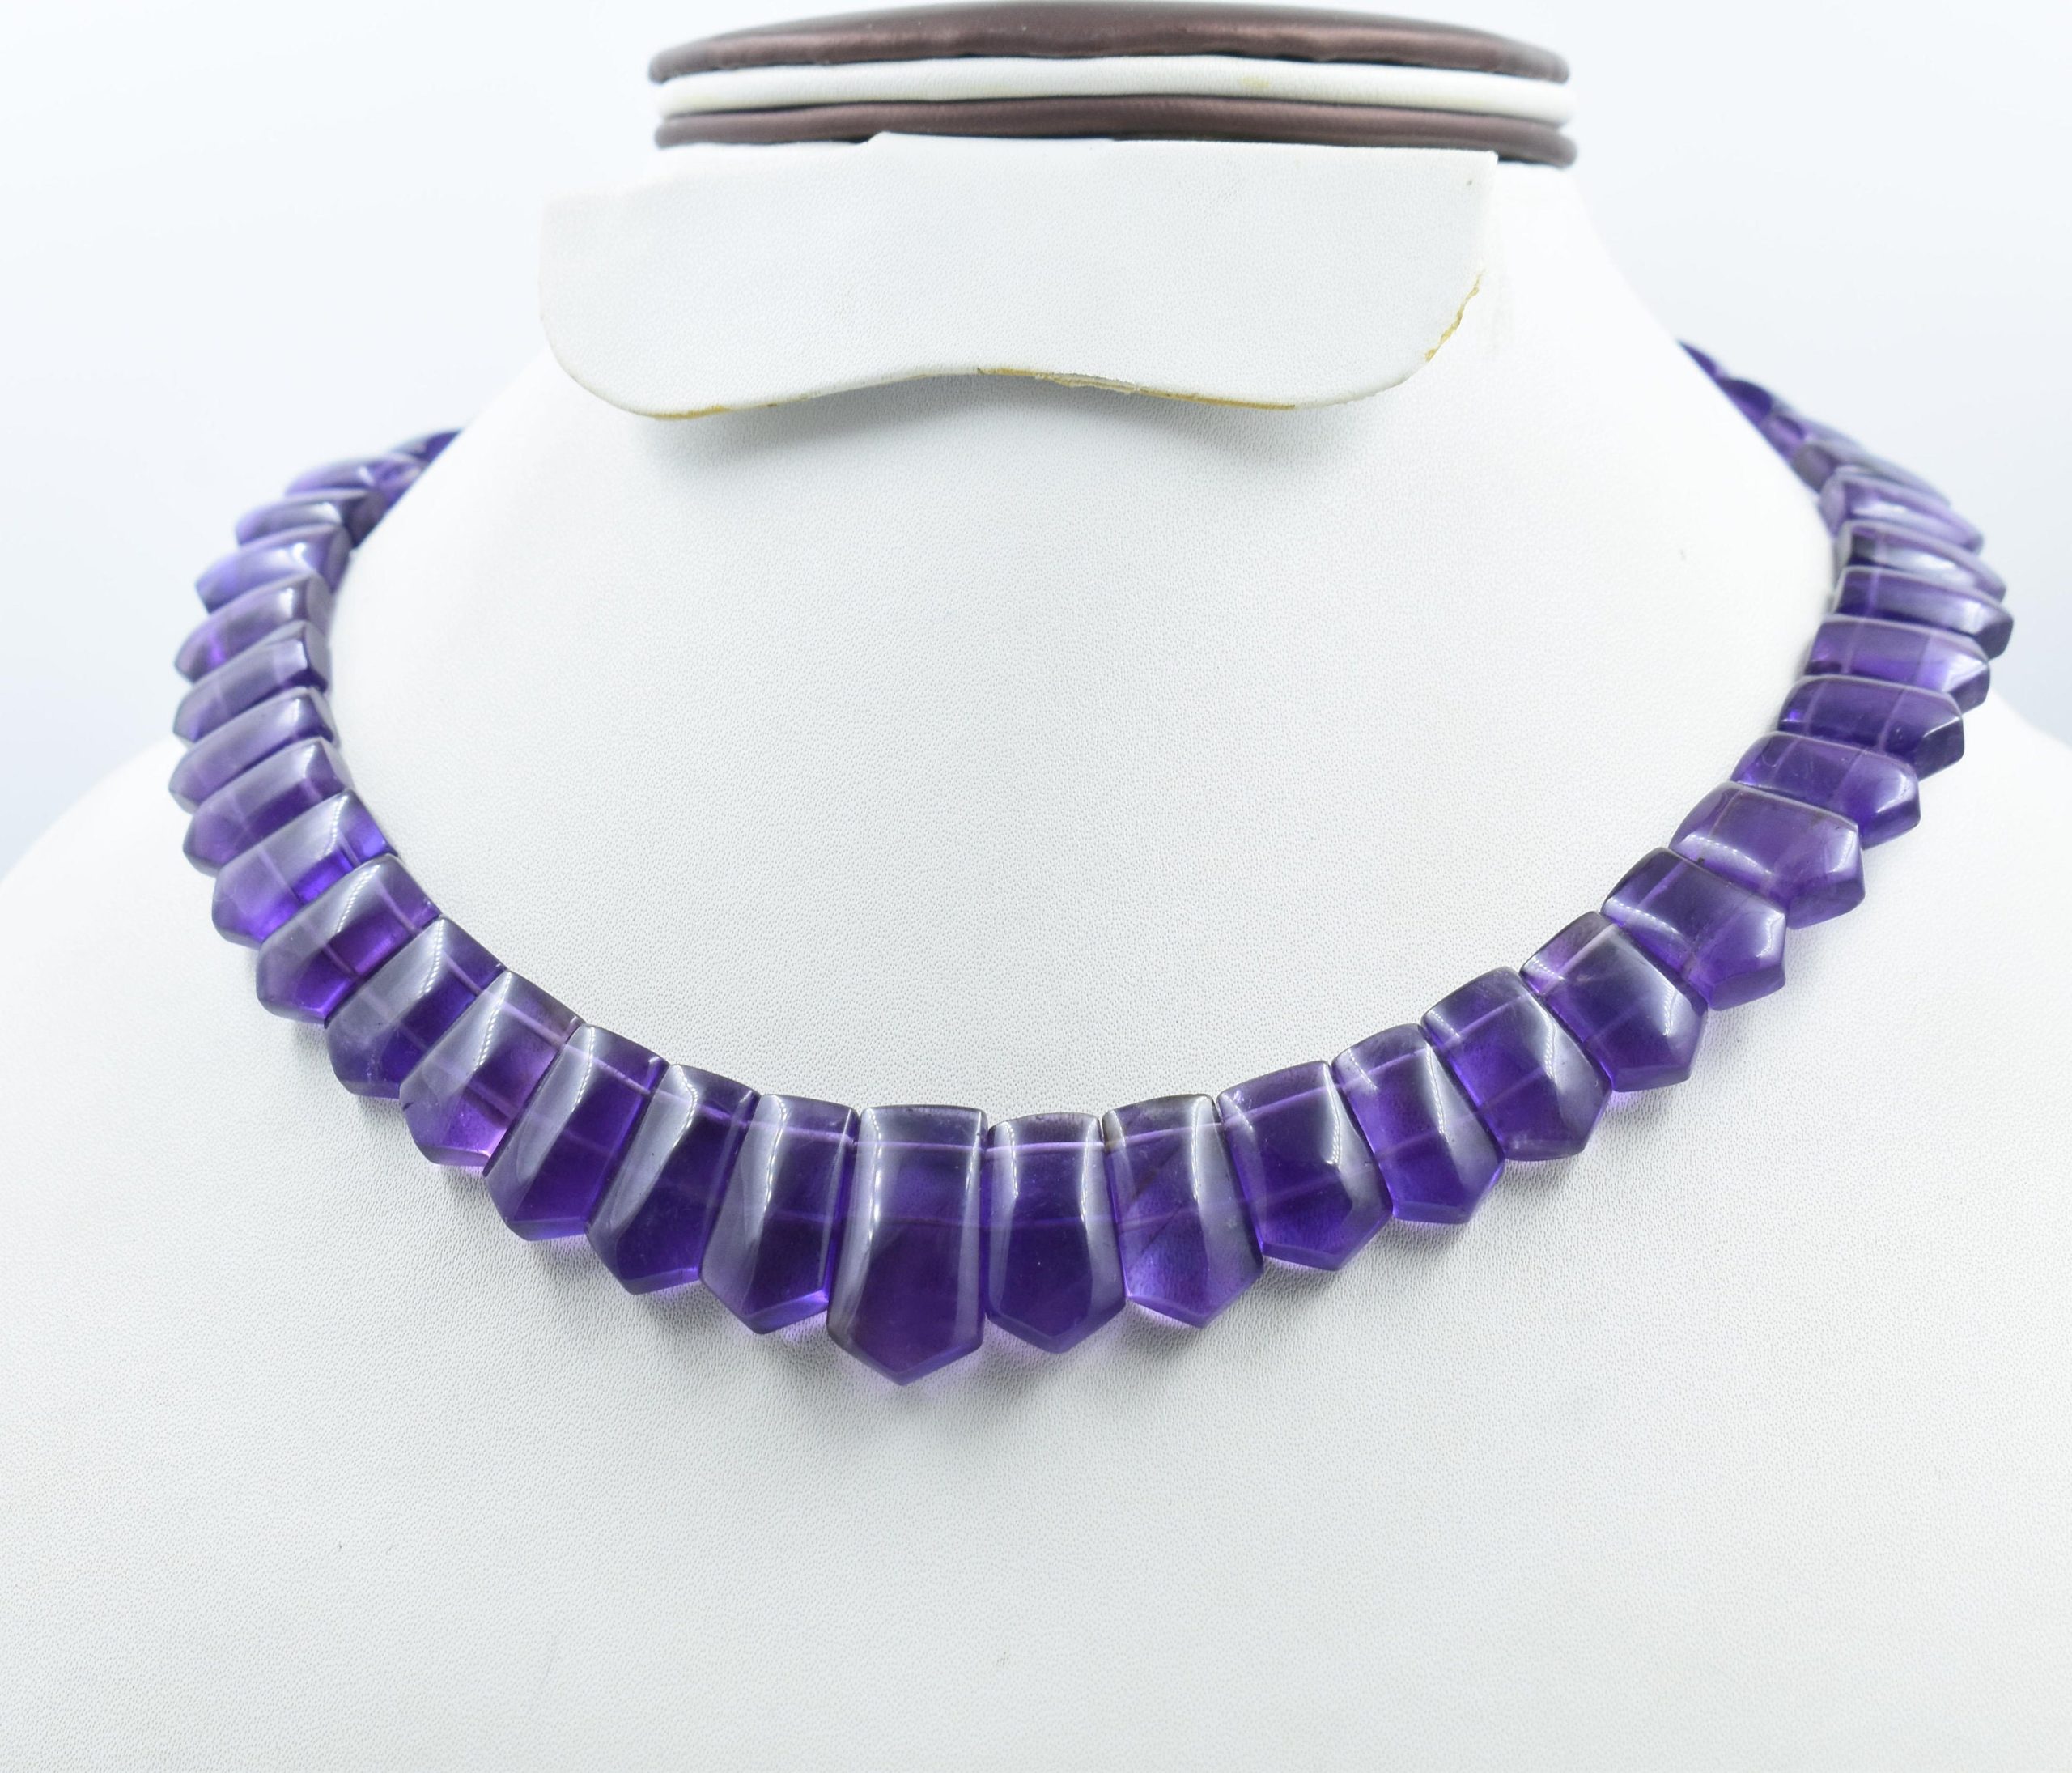 100%Natural Amethyst Handmade Necklace,Collar Necklace,Princess Necklace,rondelles beads,Gemstone Art,,Matinee Necklace,Handicraft Necklace. | Save 33% - Rajasthan Living 13